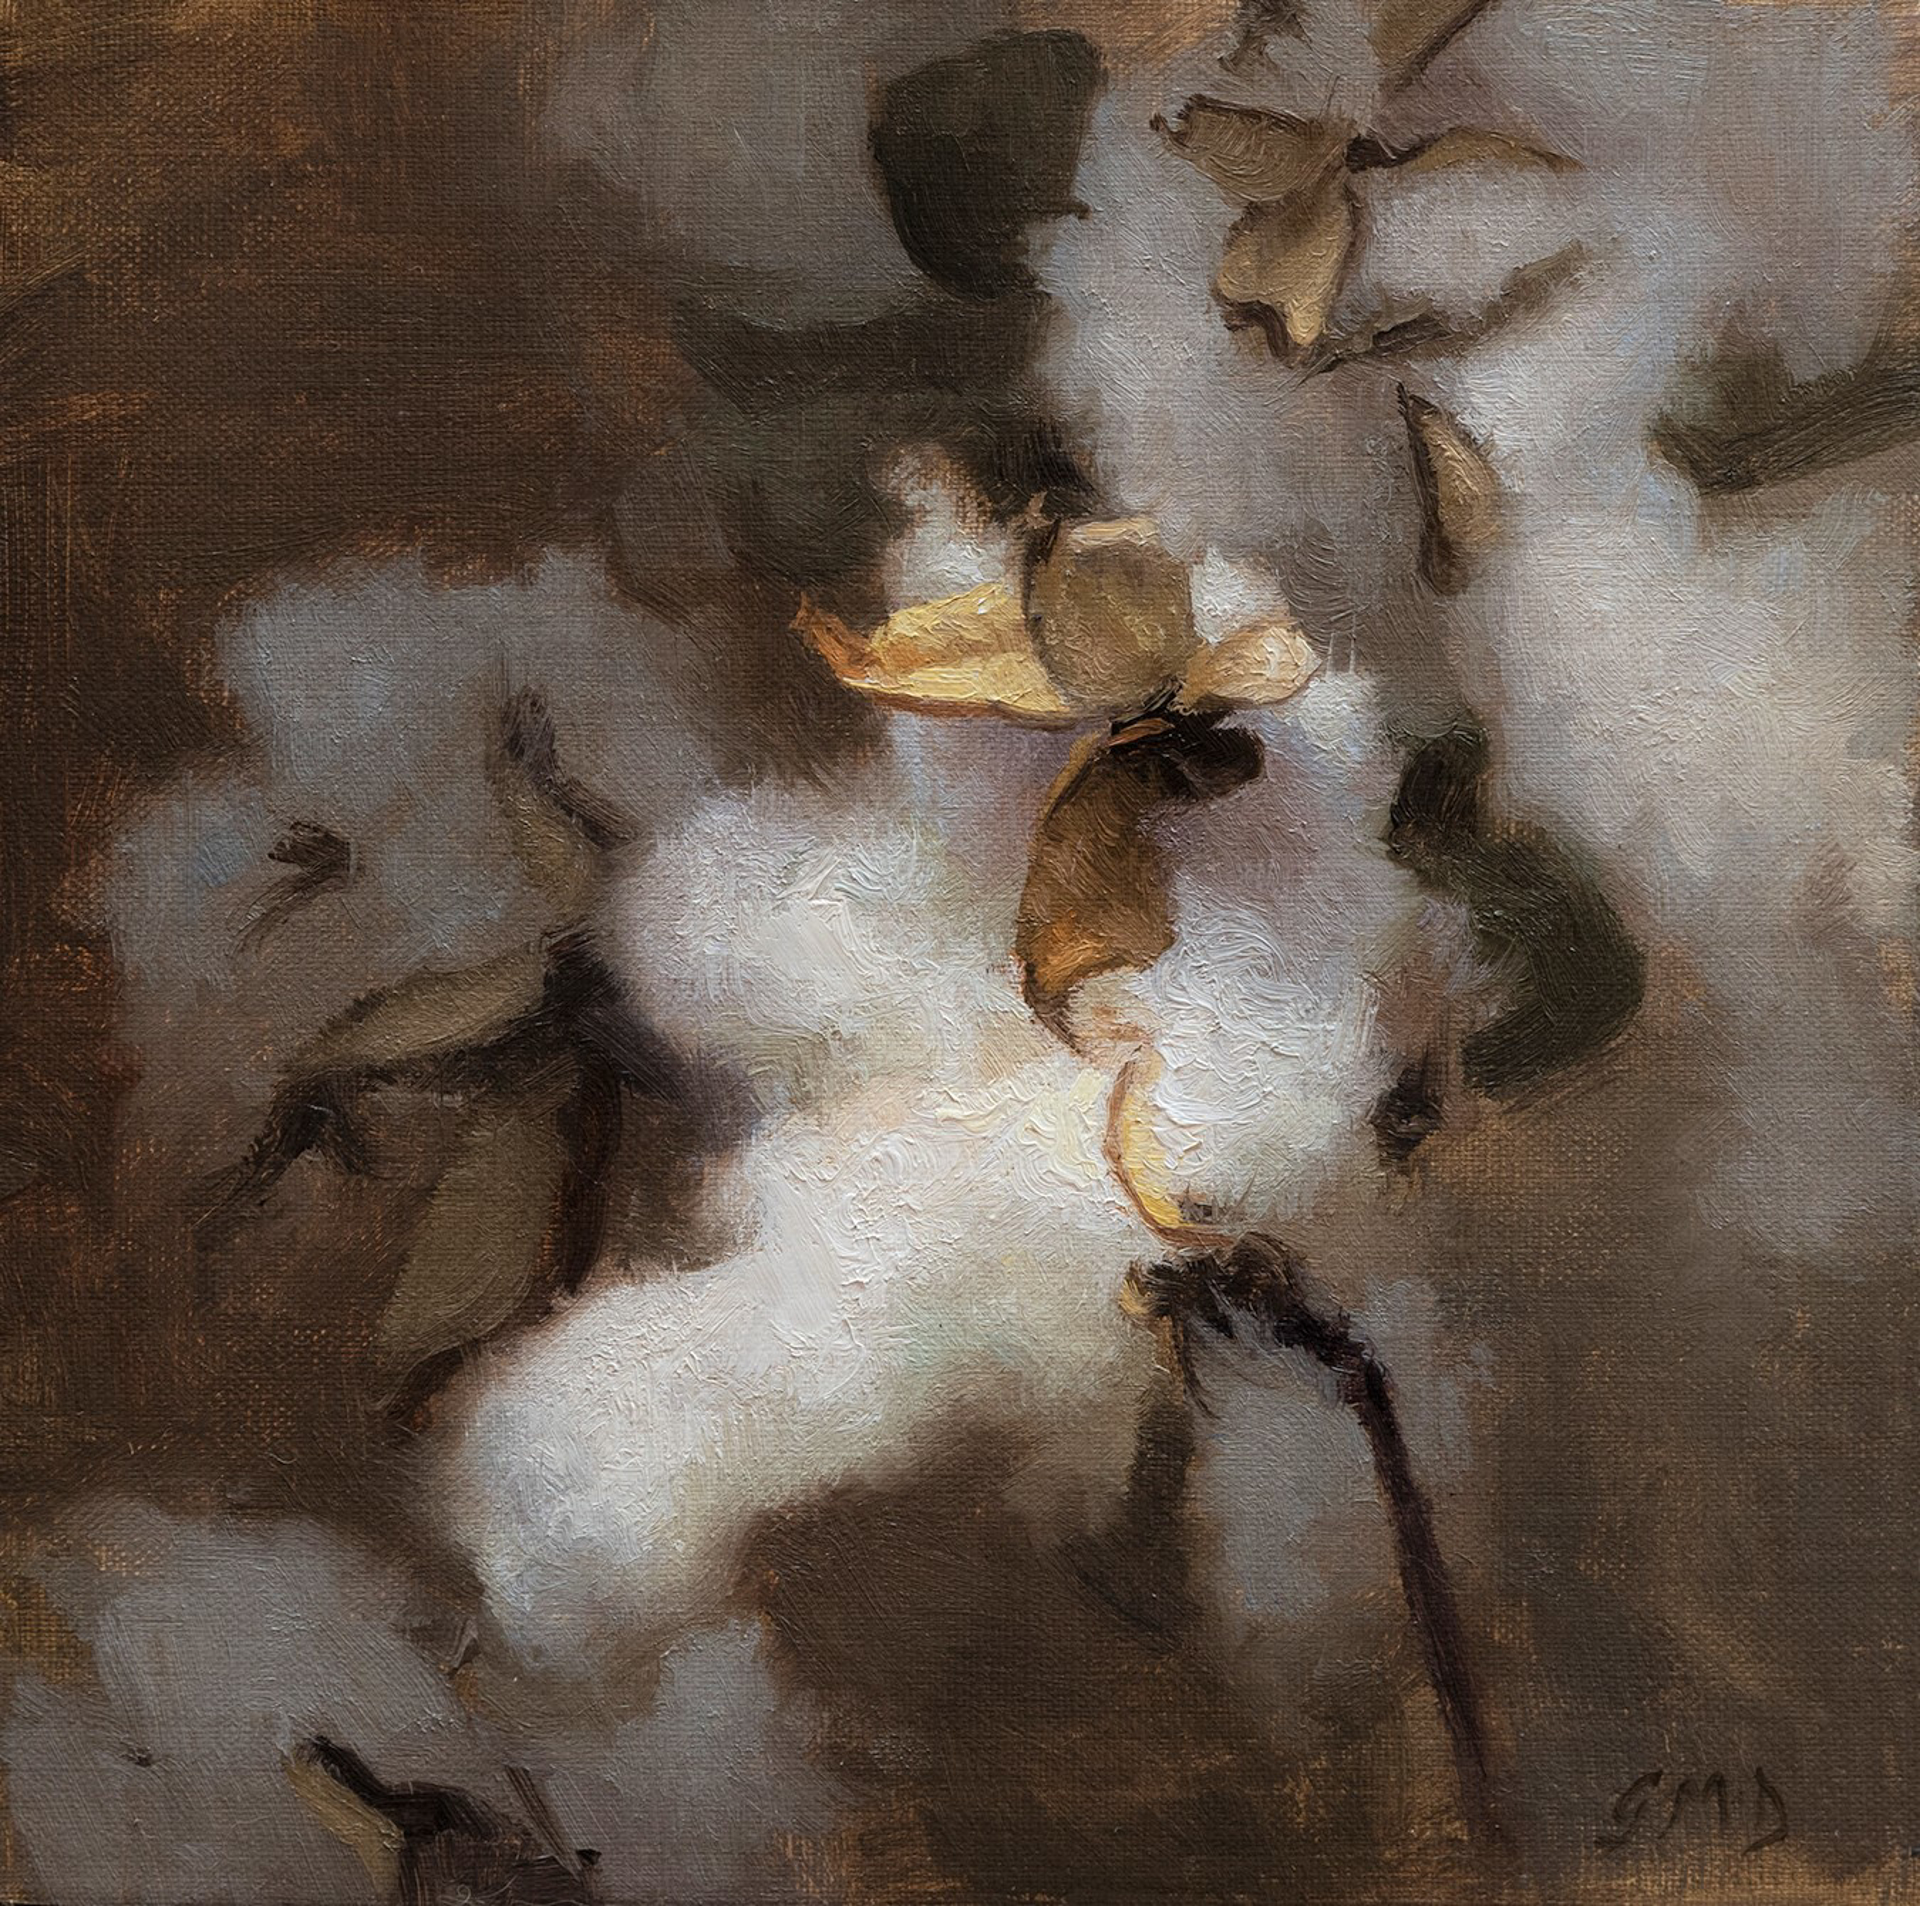 Cotton with Pods by Grace DeVito